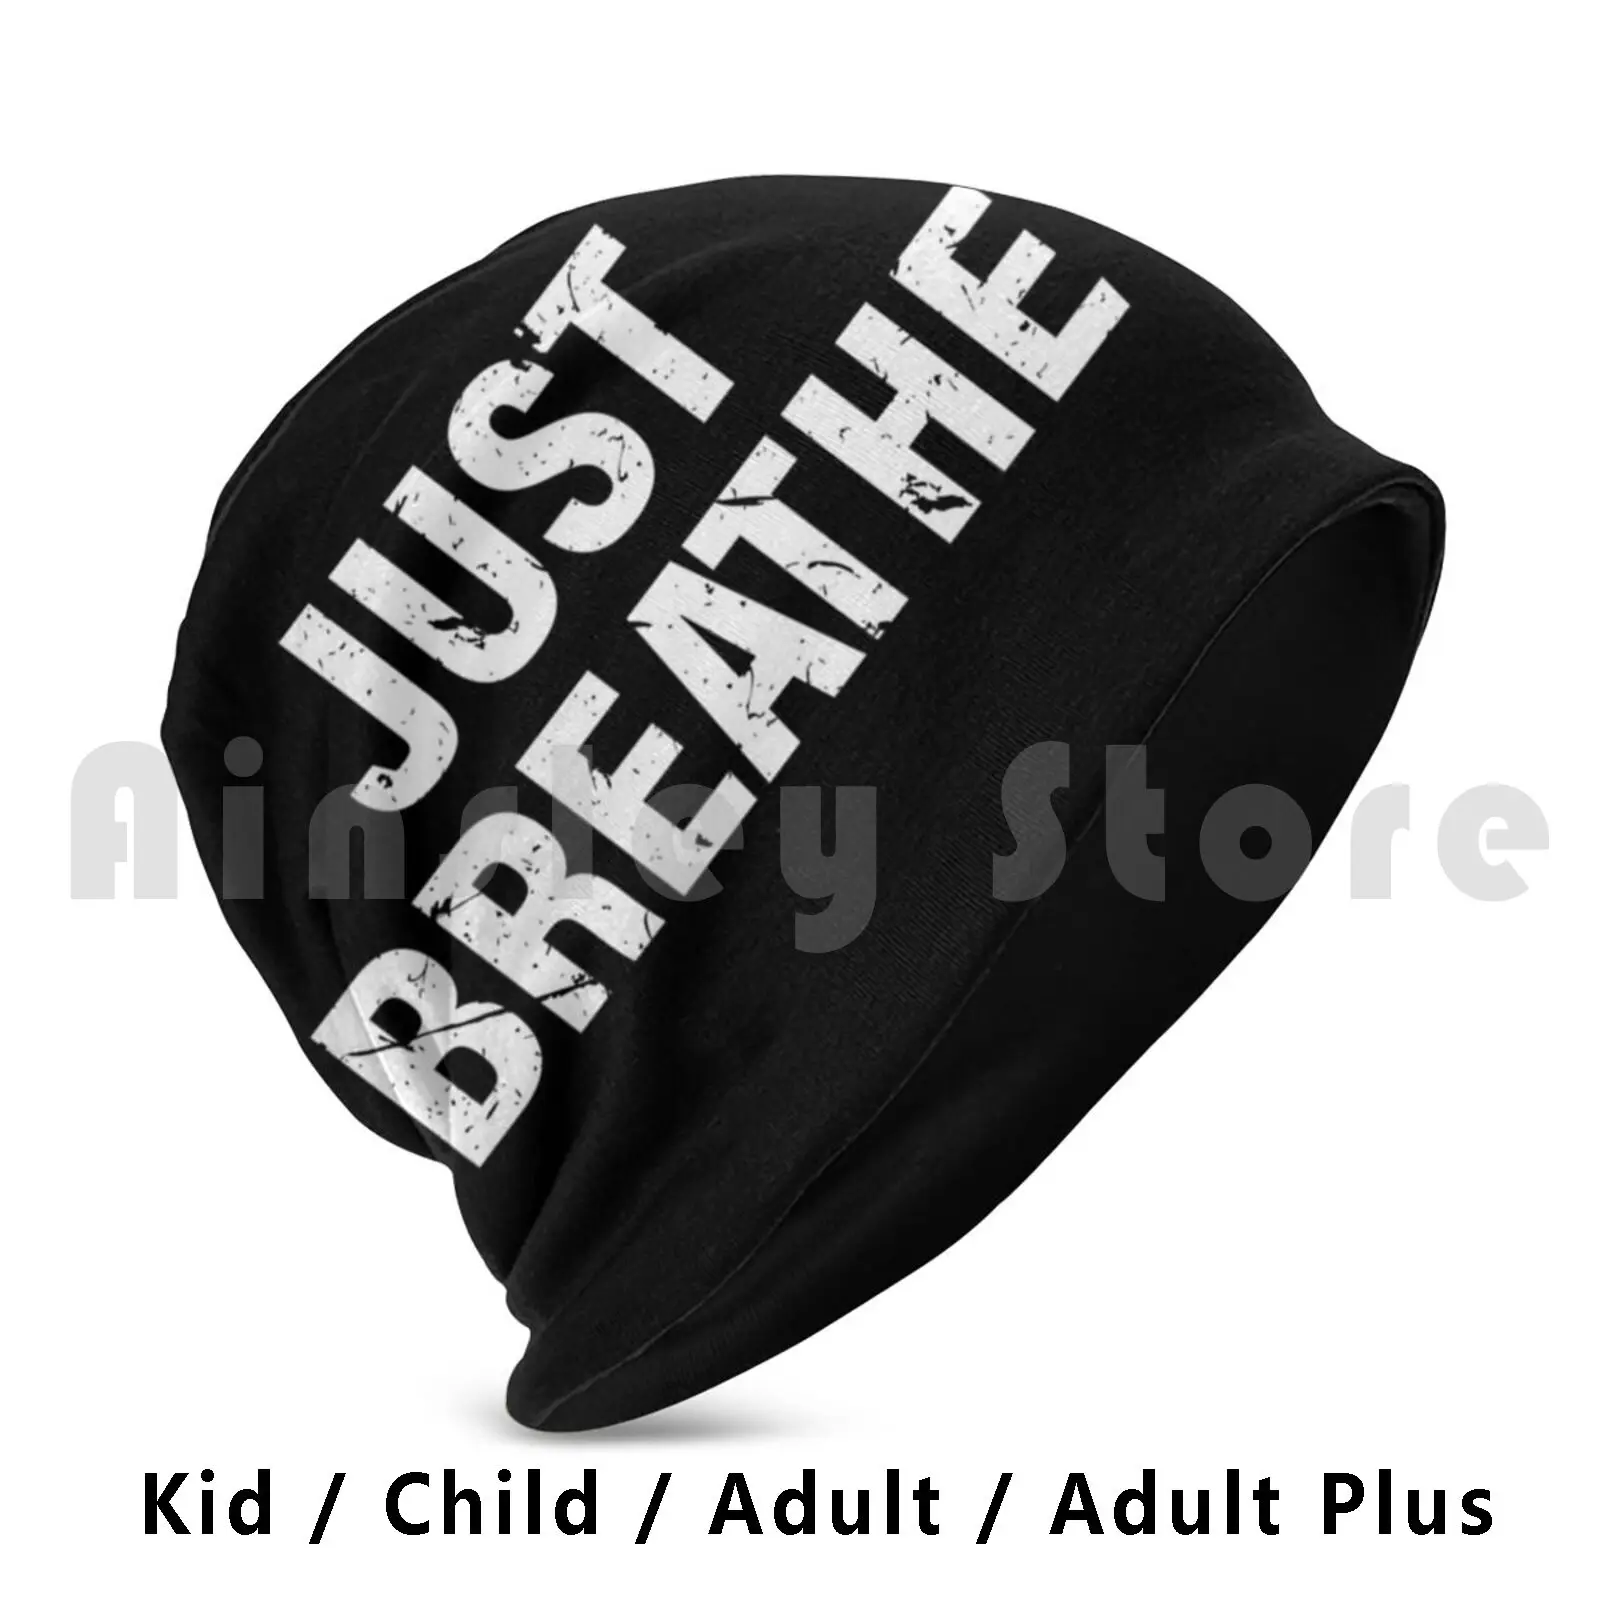 

Just Breathe Beanies Knit Hat Hip Hop Grunge Music Seattle Soundgarden 90s Alice In Chains Just Breathe